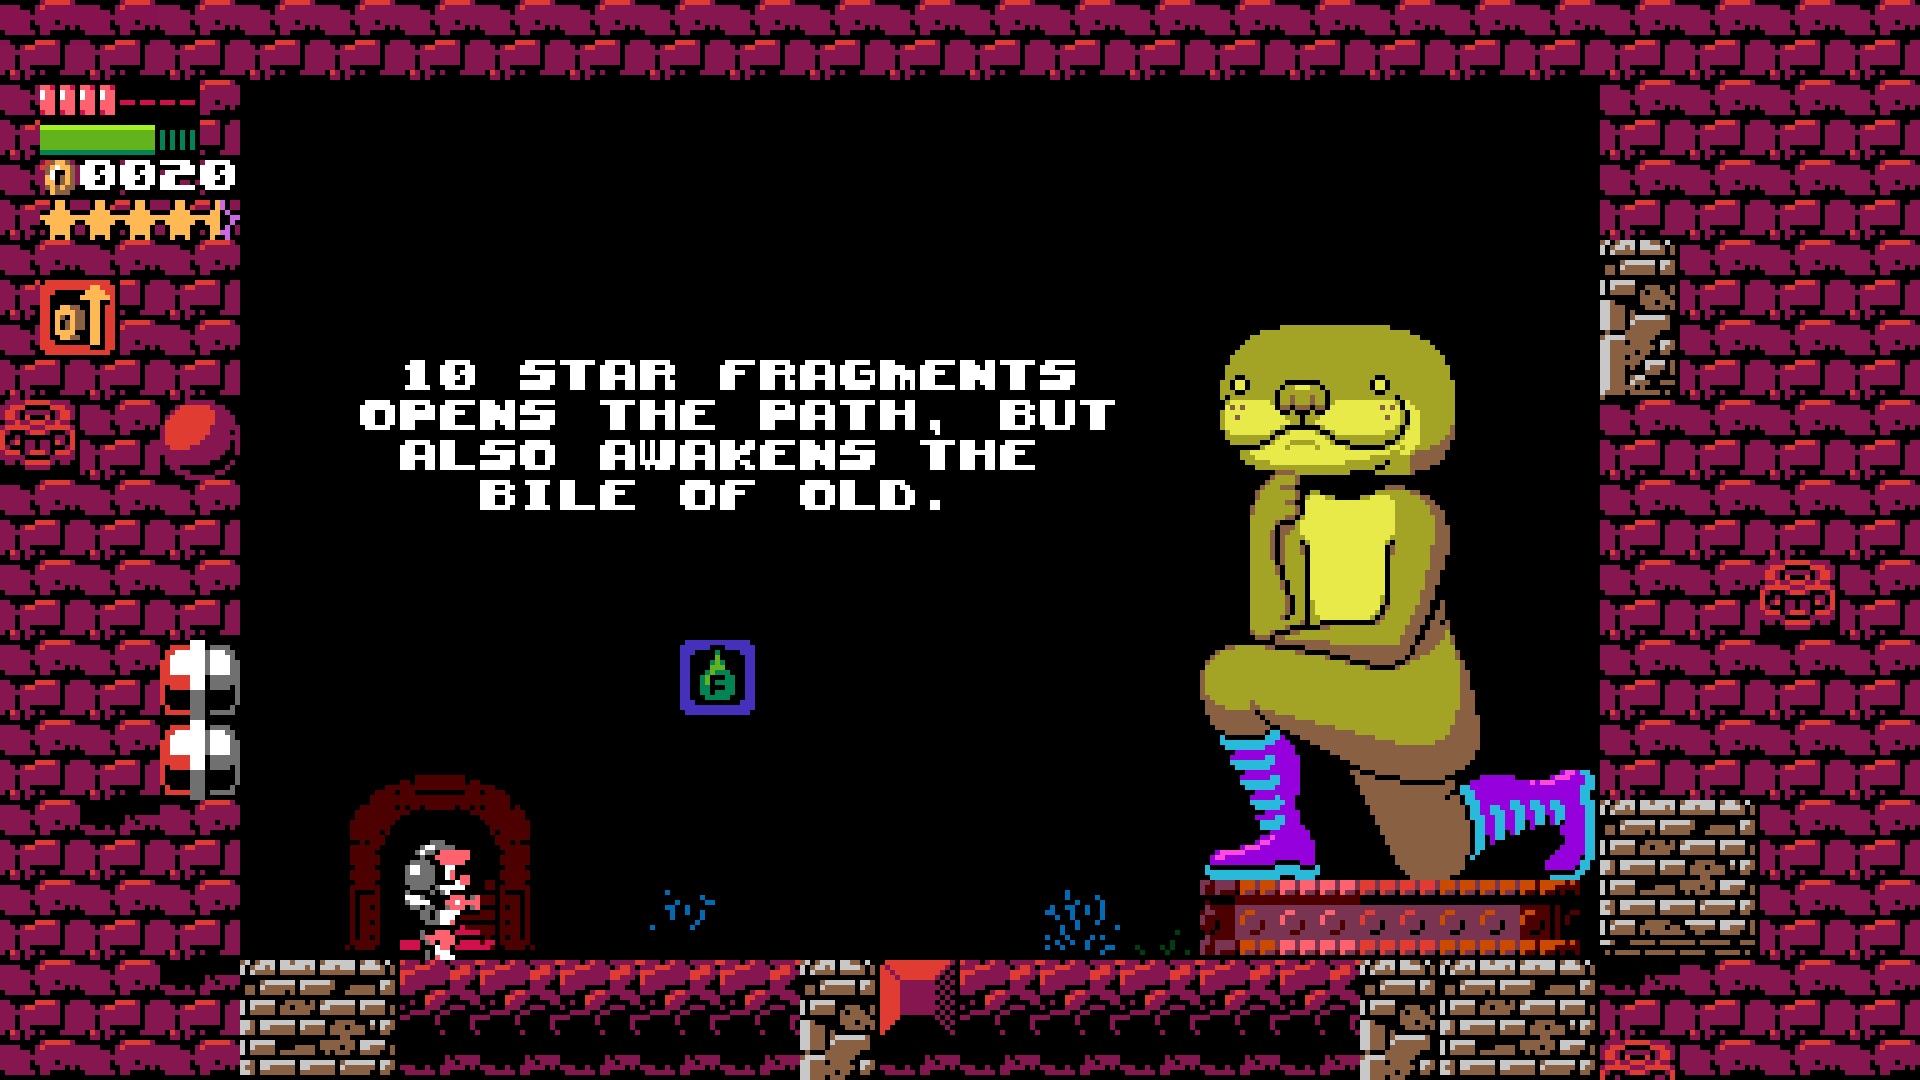 A megaman style platformer where the main character is talking to a giant otter